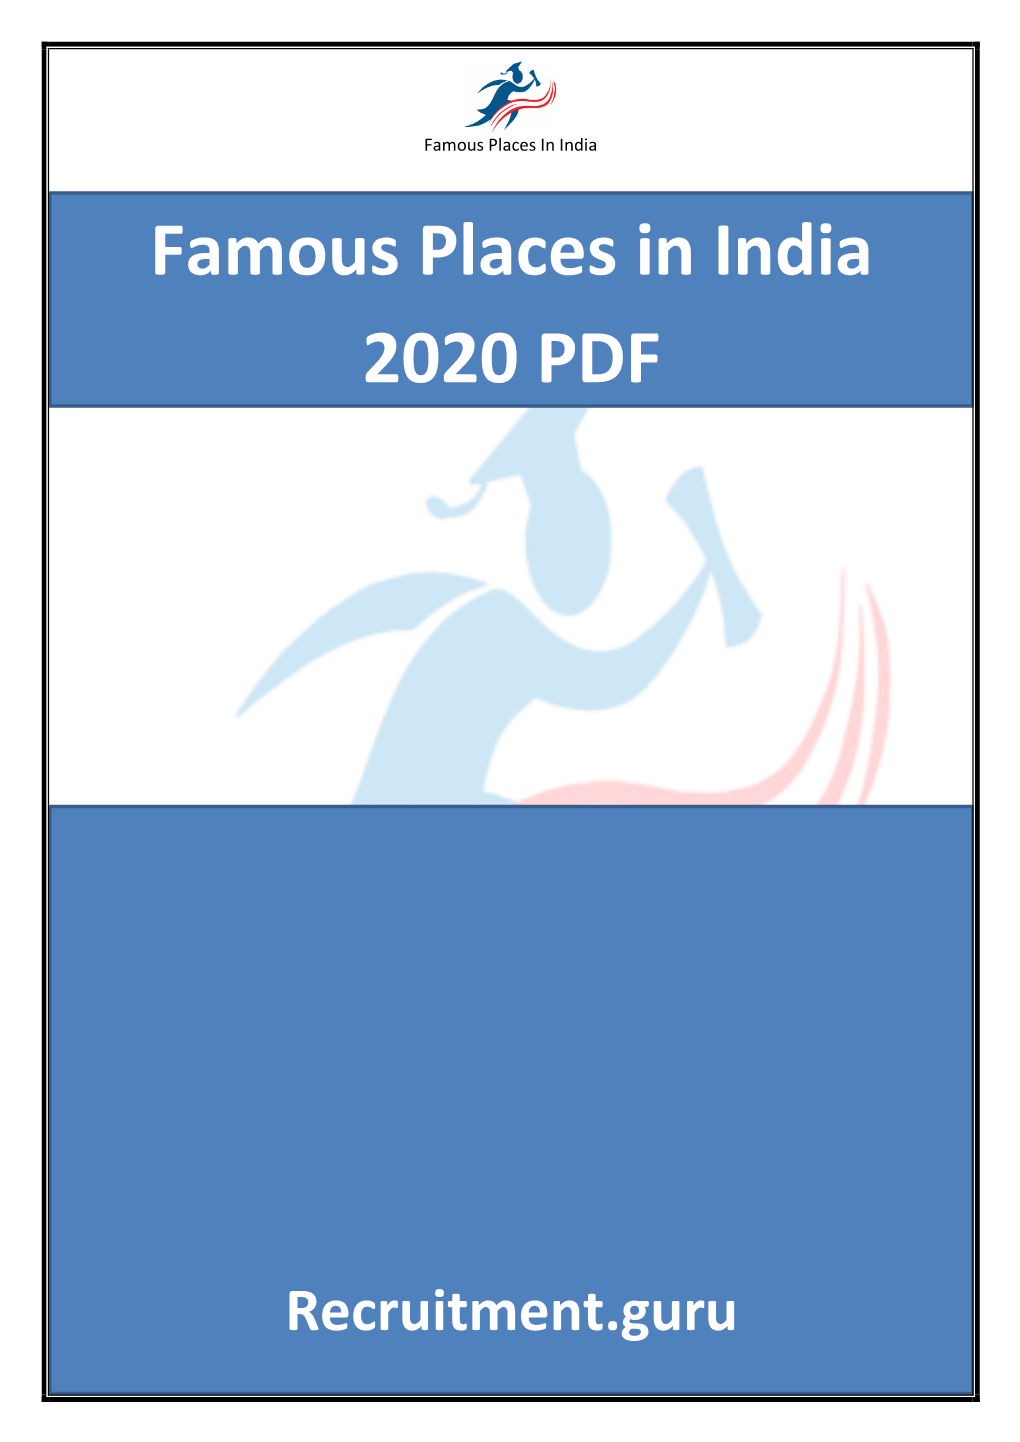 Famous Places in India 2020 PDF